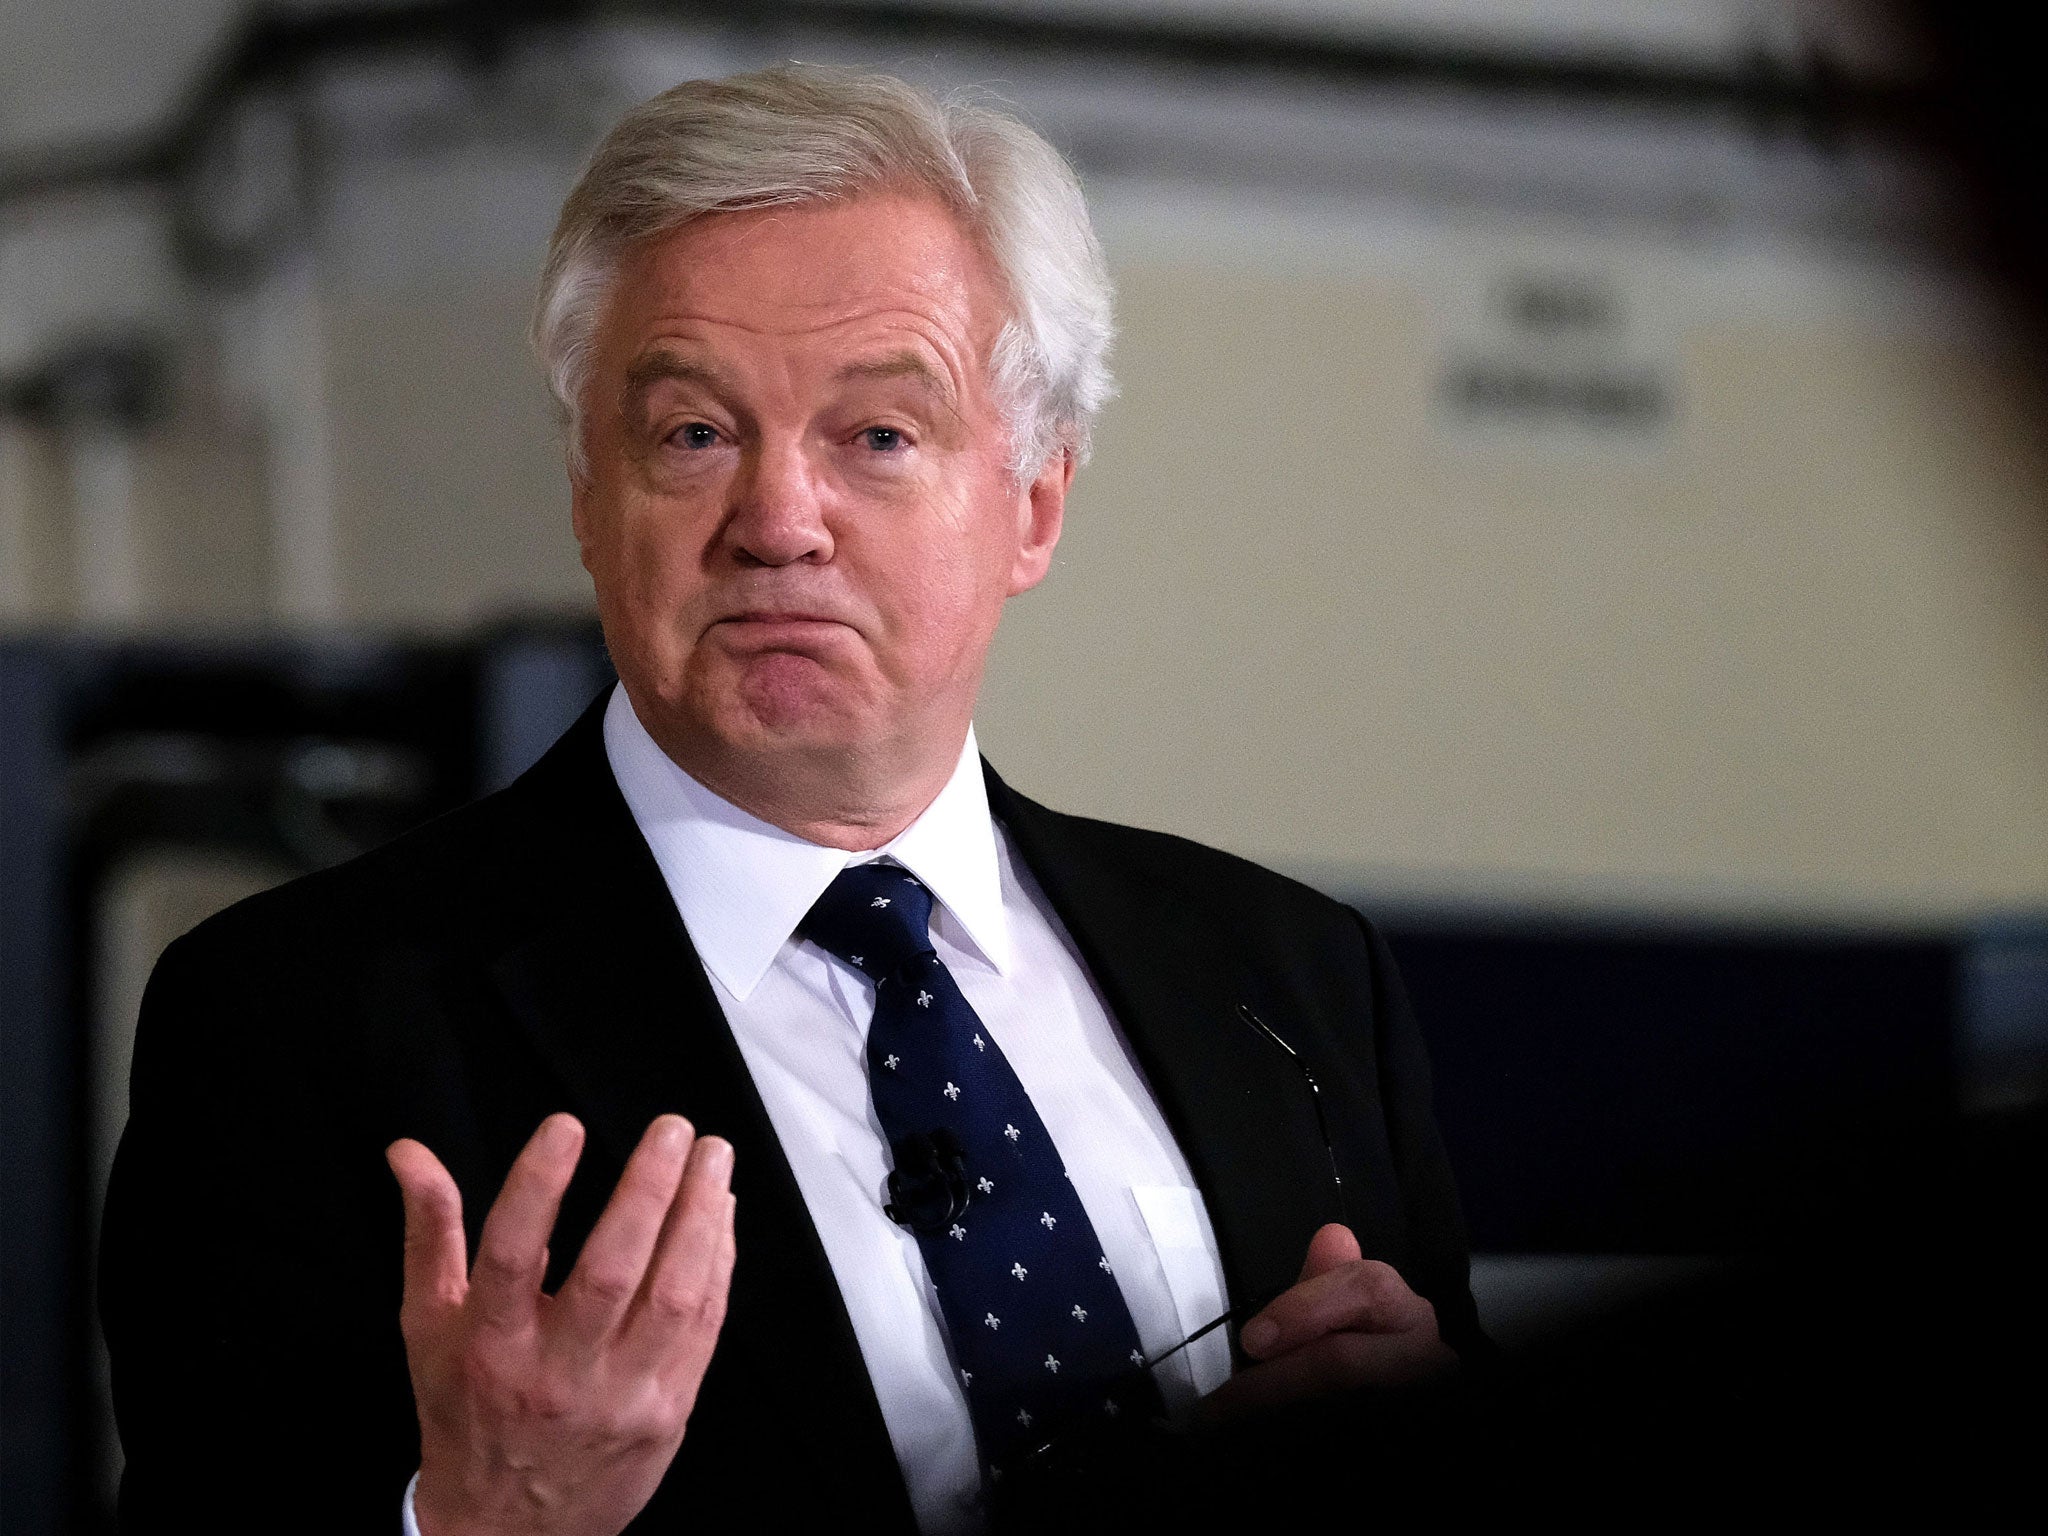 Brexit Secretary David Davis delivers a speech on the Brexit implementation period earlier this month